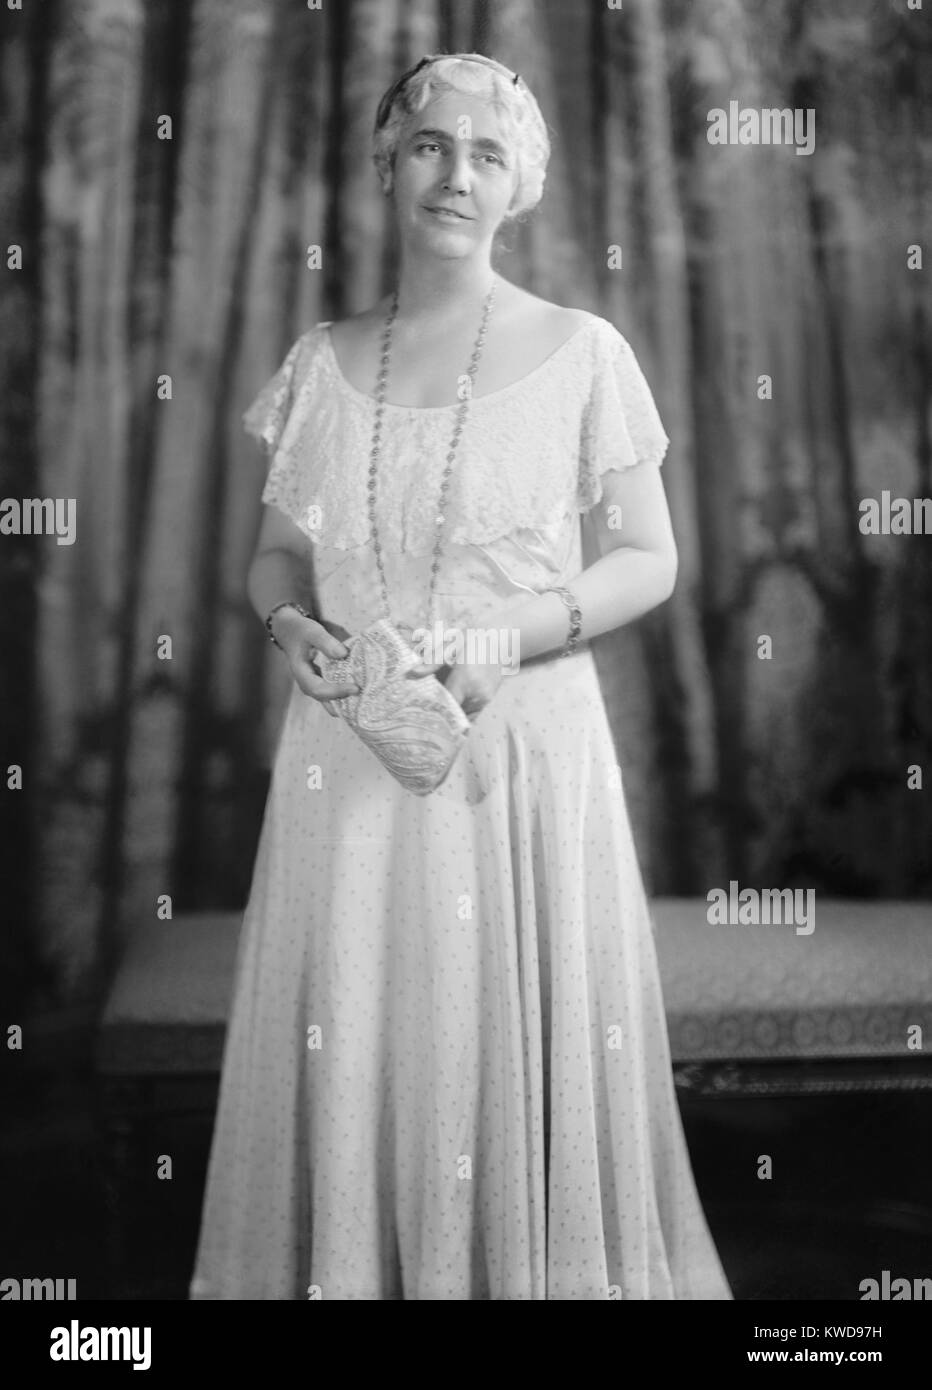 La First Lady Lou Hoover, ca. 1928-1932. (BSLOC 2015 16 56) Foto Stock